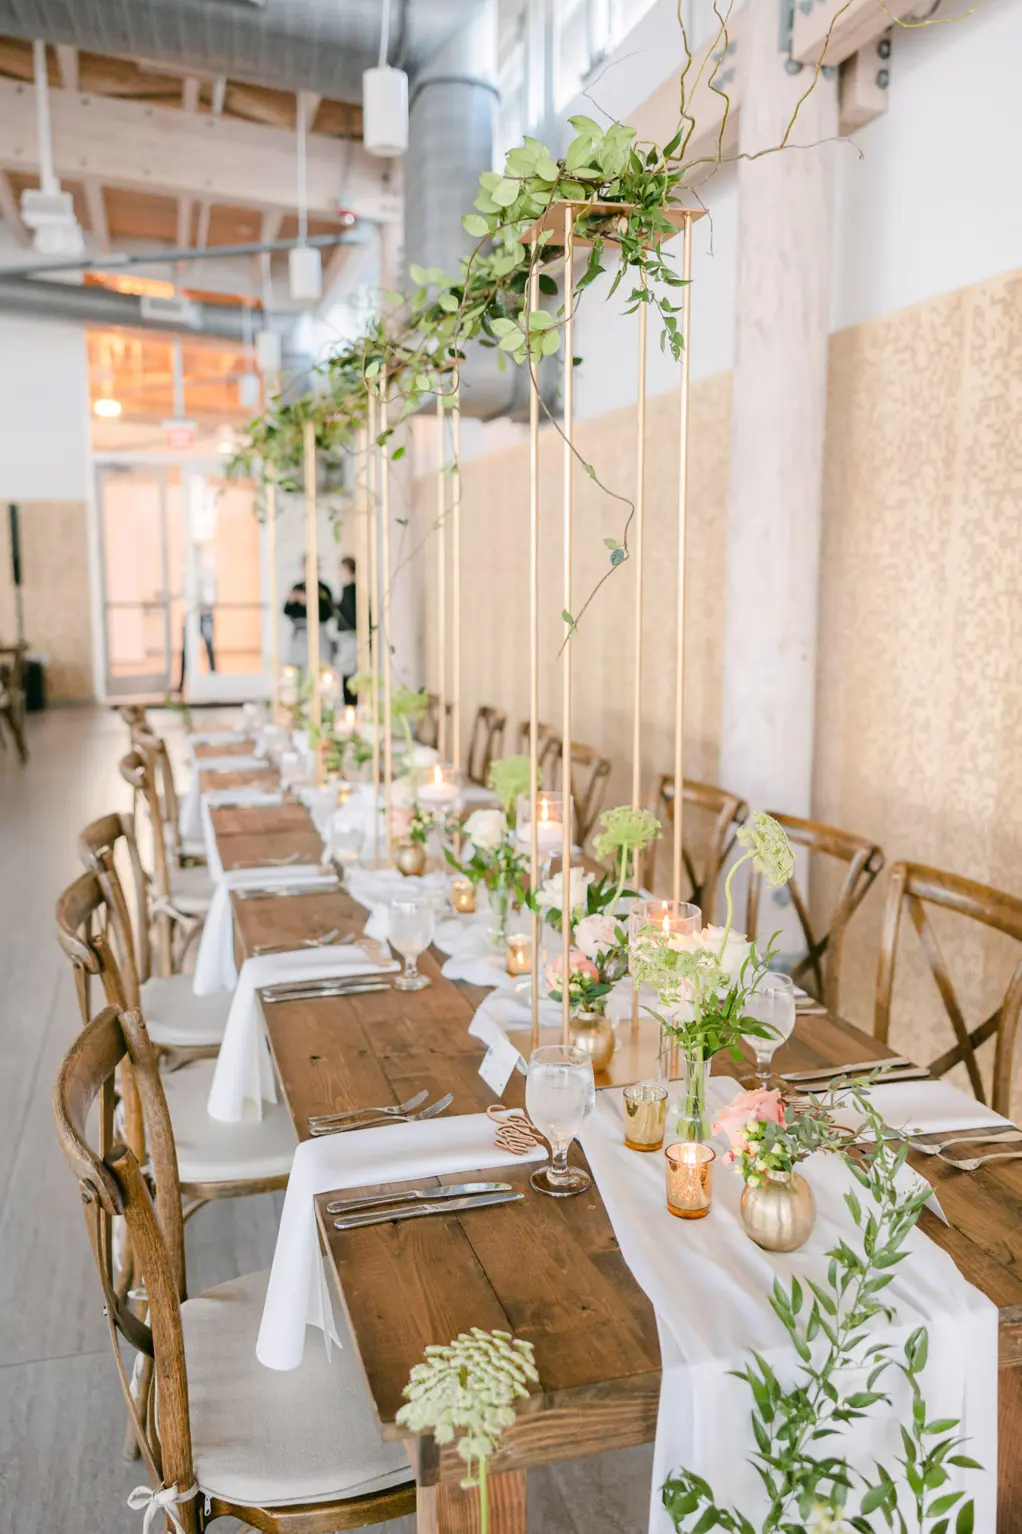 Elegant Garden Wedding Reception Decor Inspiration | Rustic Long Wooden Feasting Table With French Country Cross Back Chairs | Floating Candles | Tall Flower Stand Centerpieces with Greenery Ideas | Downtown Riverwalk Event Venue Tampa River Center